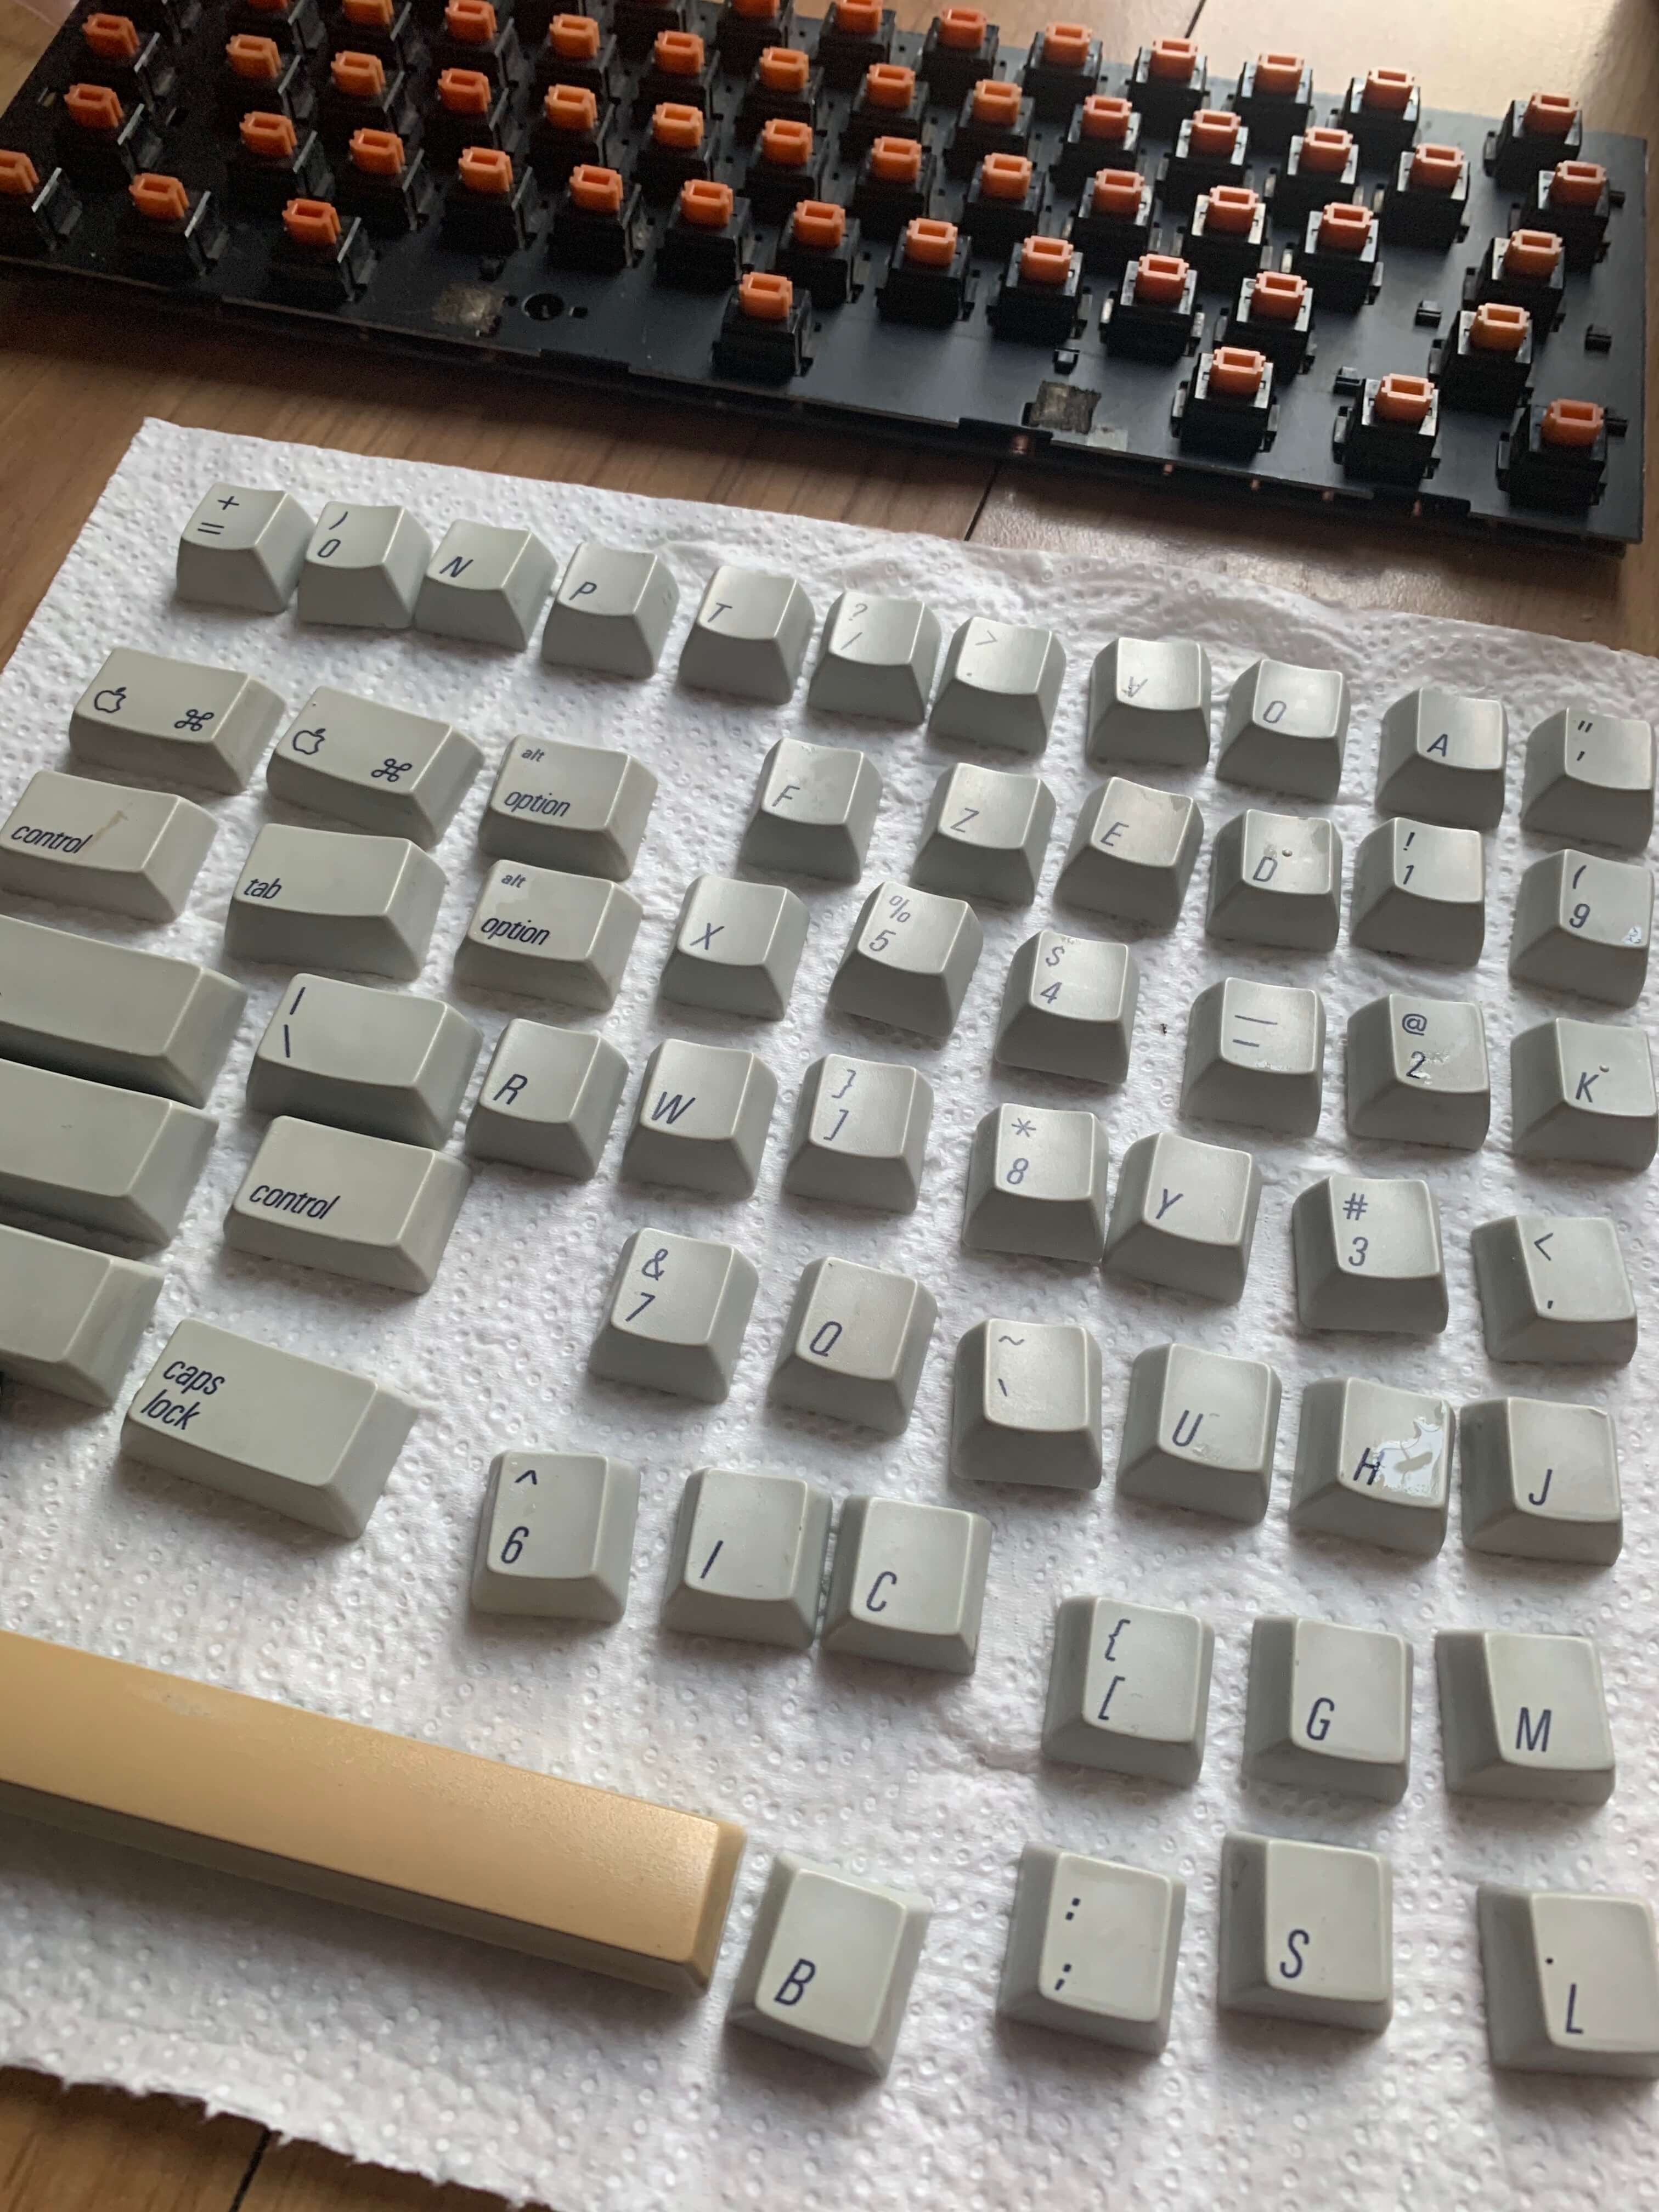 Drying keycaps